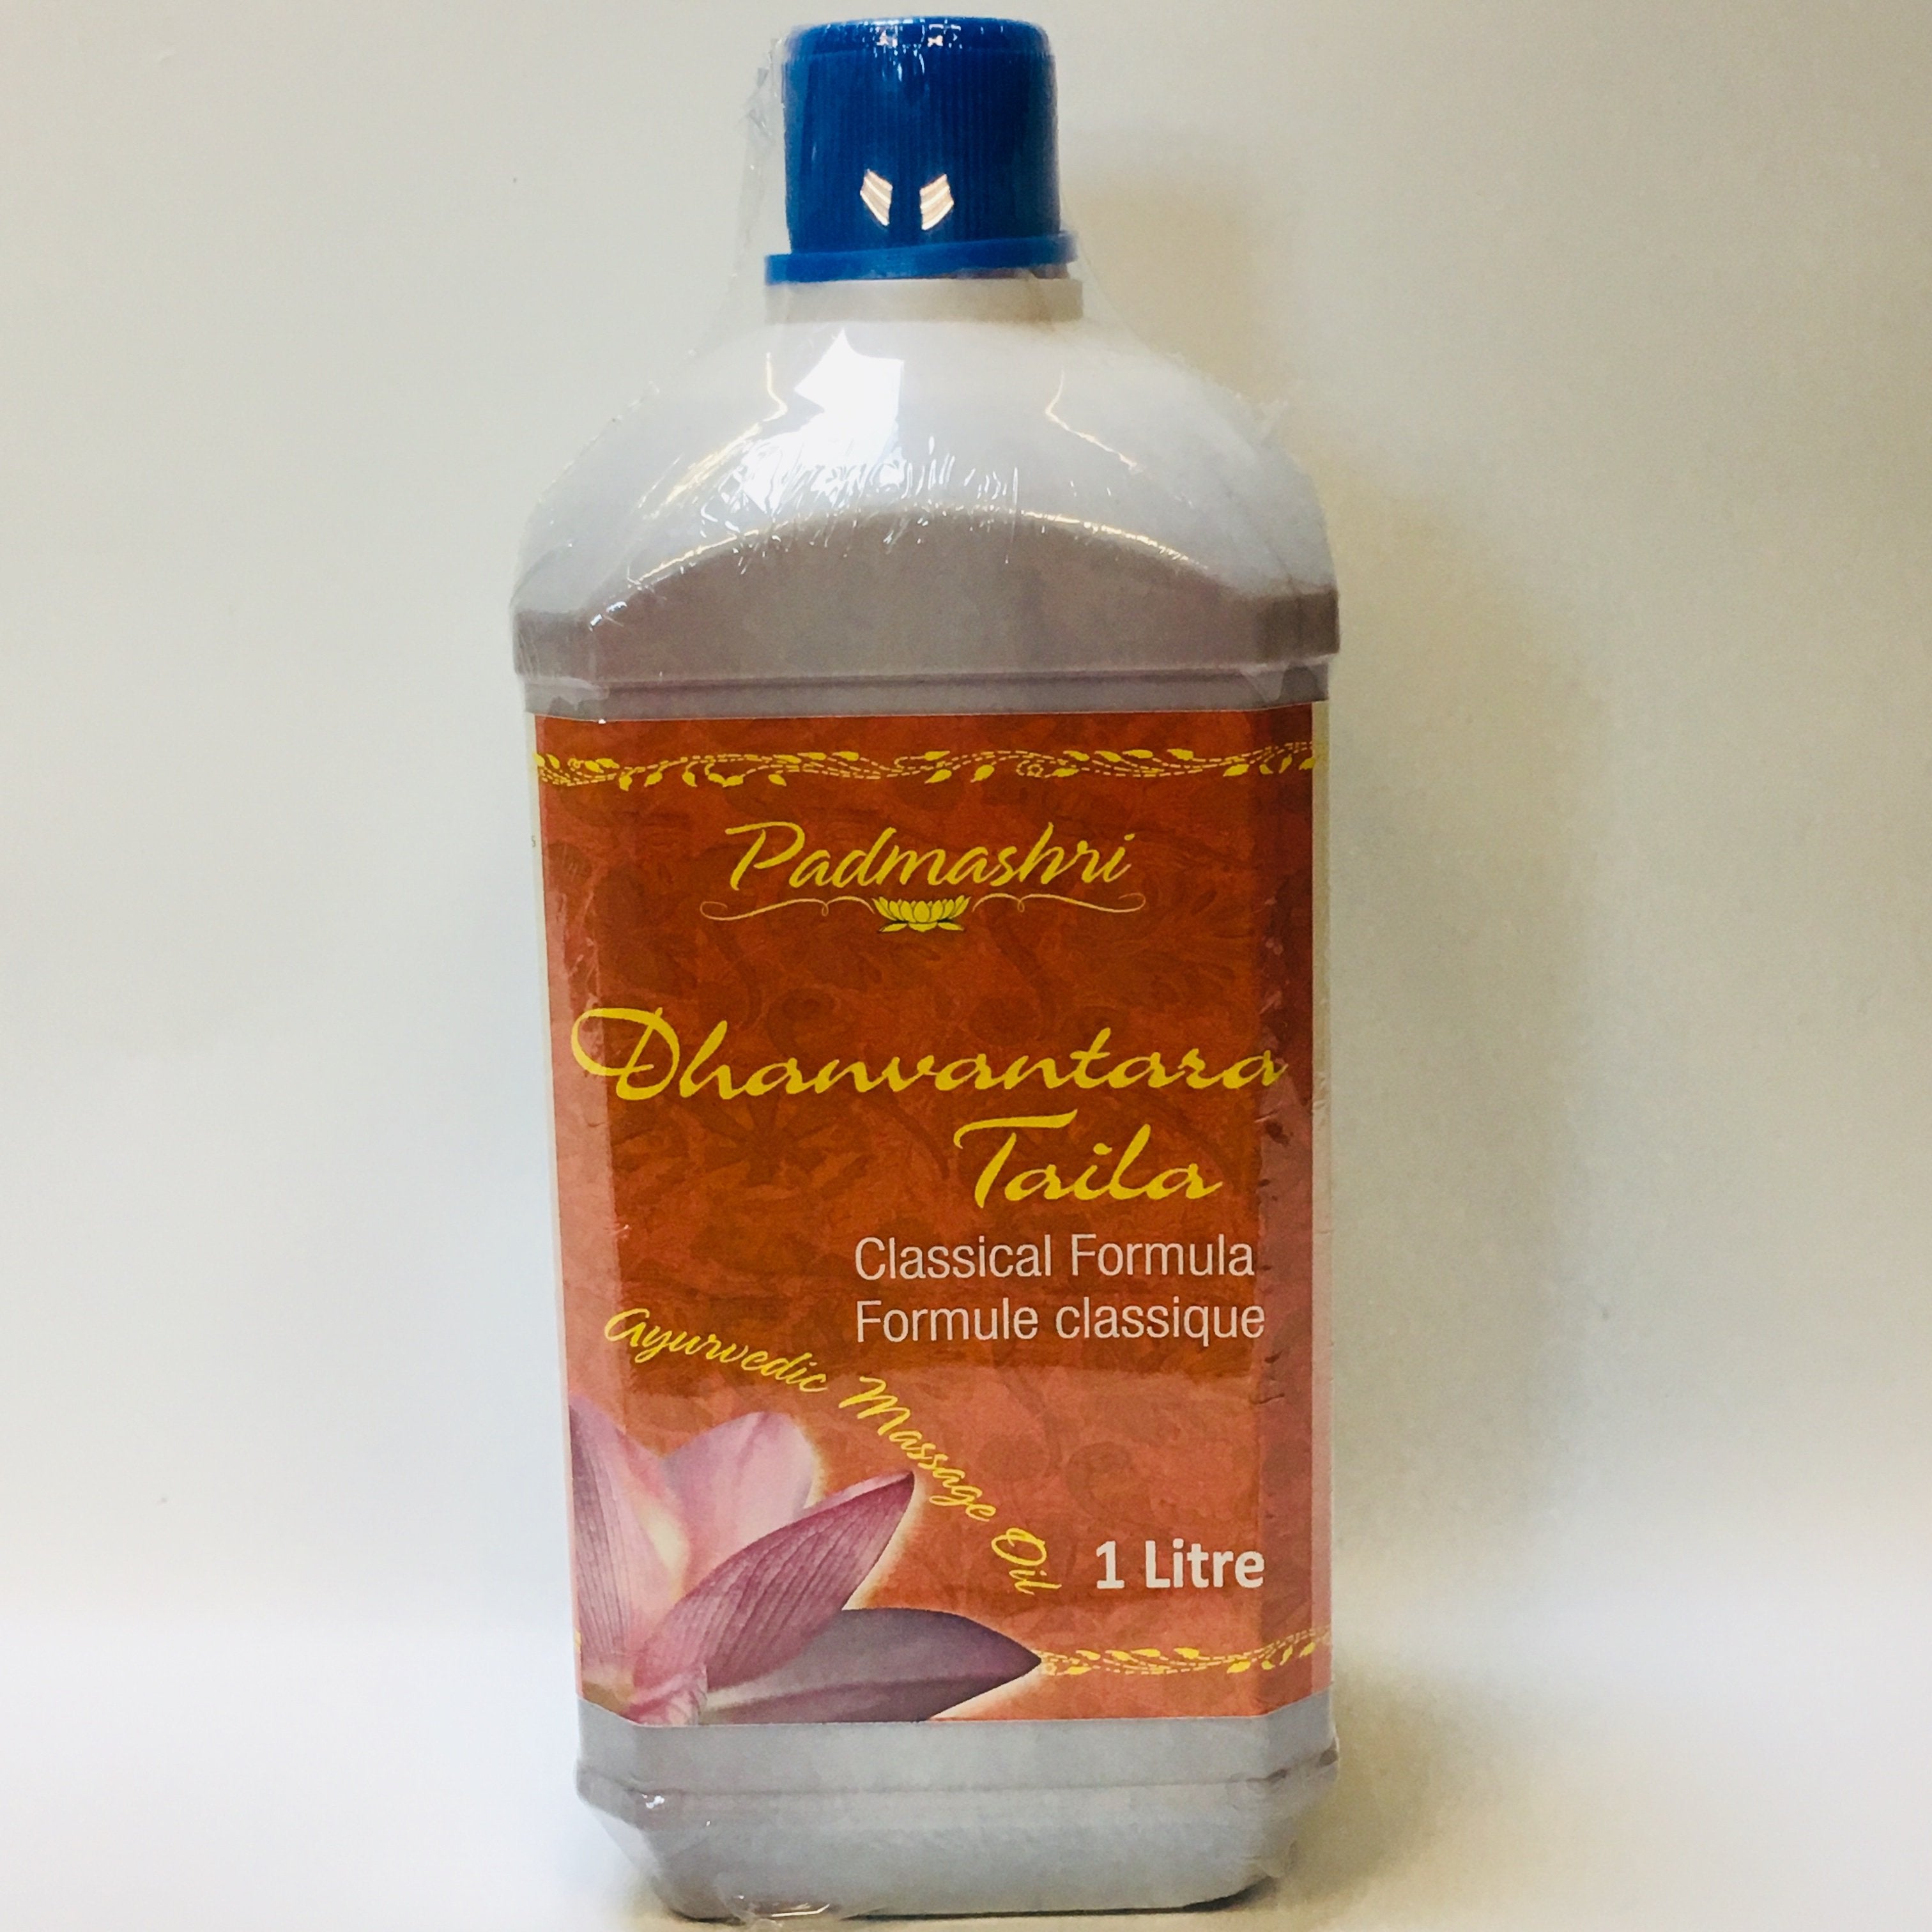 Ayurvedic Dhanvantara Classical Massage Oil - The massage with this oil helps diminish the appearance of stretch marks with regular use to leave skin looking smooth and flexible. Suitable for professional use in wellness clinics as well as self-care. Provides essential nourishment and moisture to the skin.